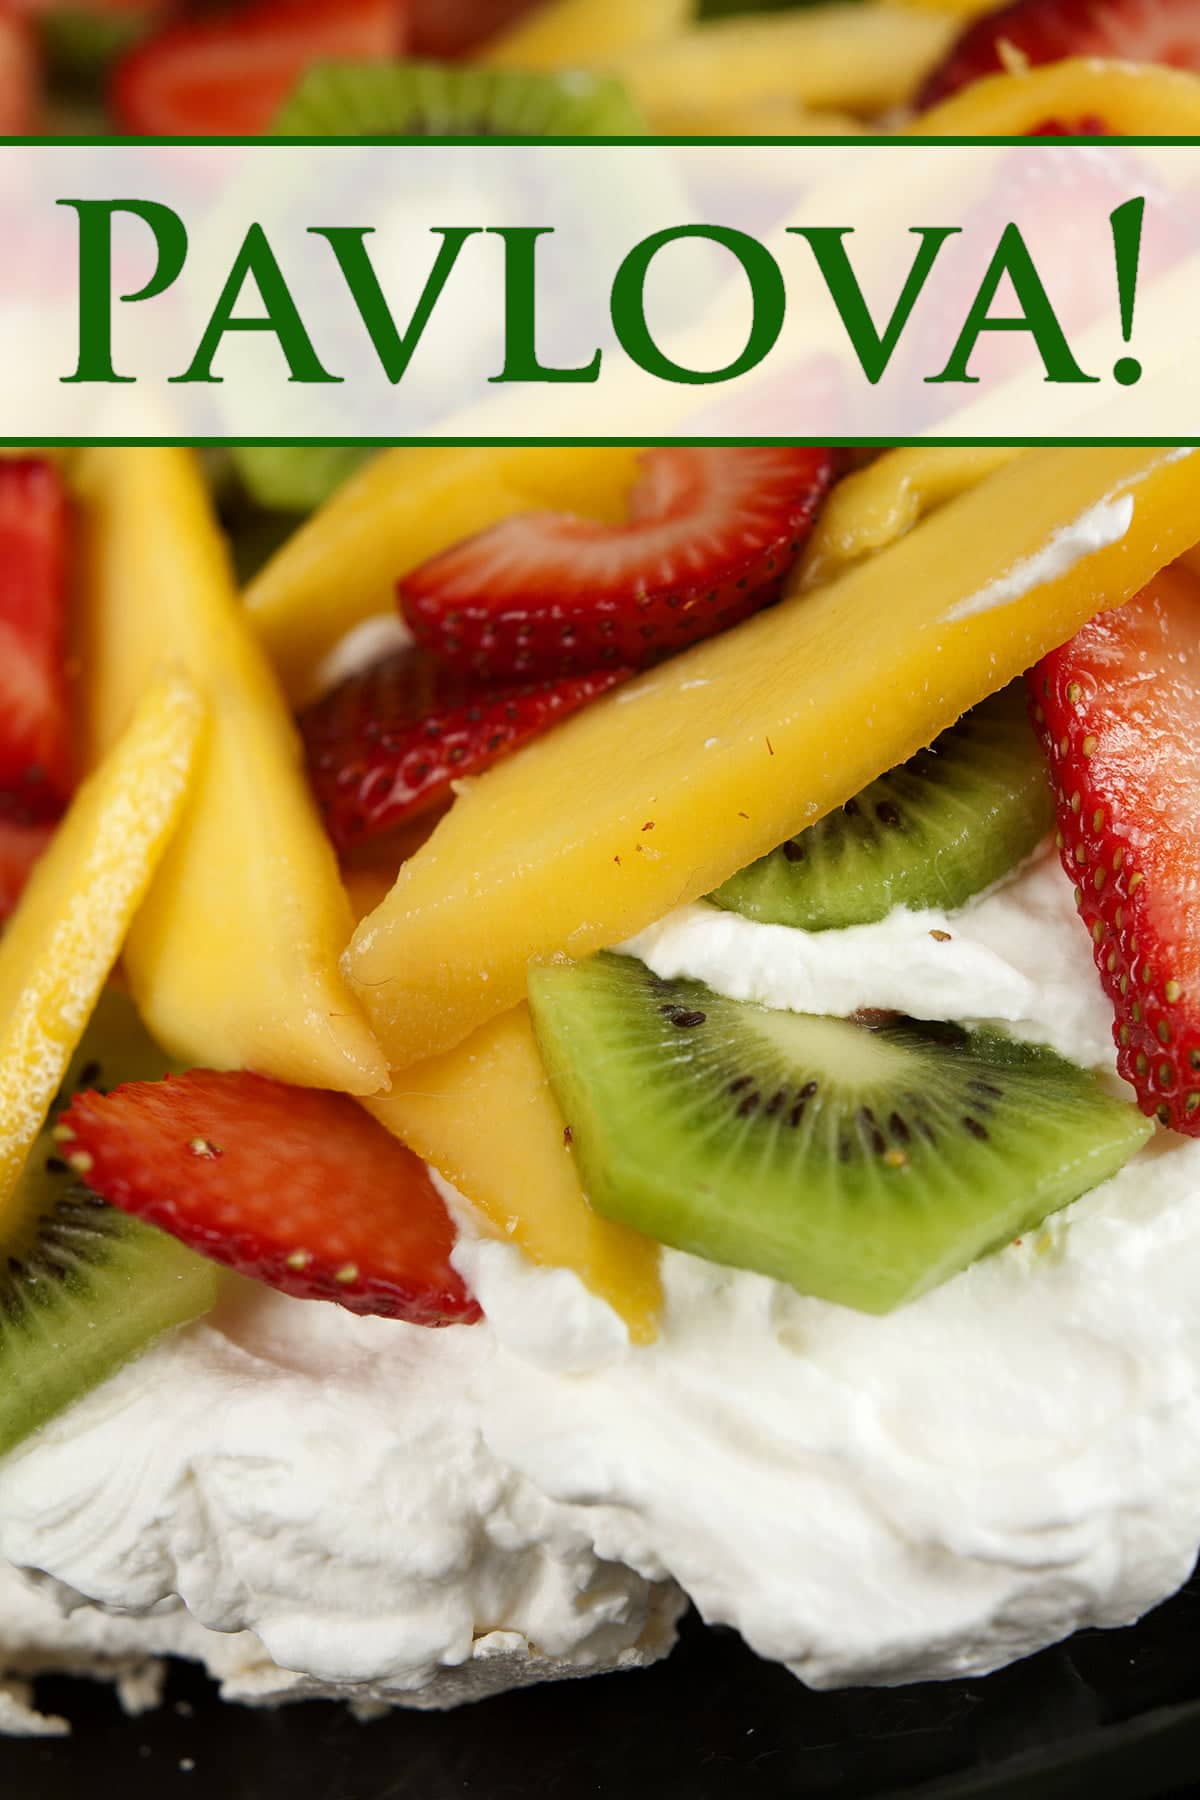 Close up view of a Pavlova: White meringue topped with whipped cream, strawberries, kiwi fruit, and mango slices.